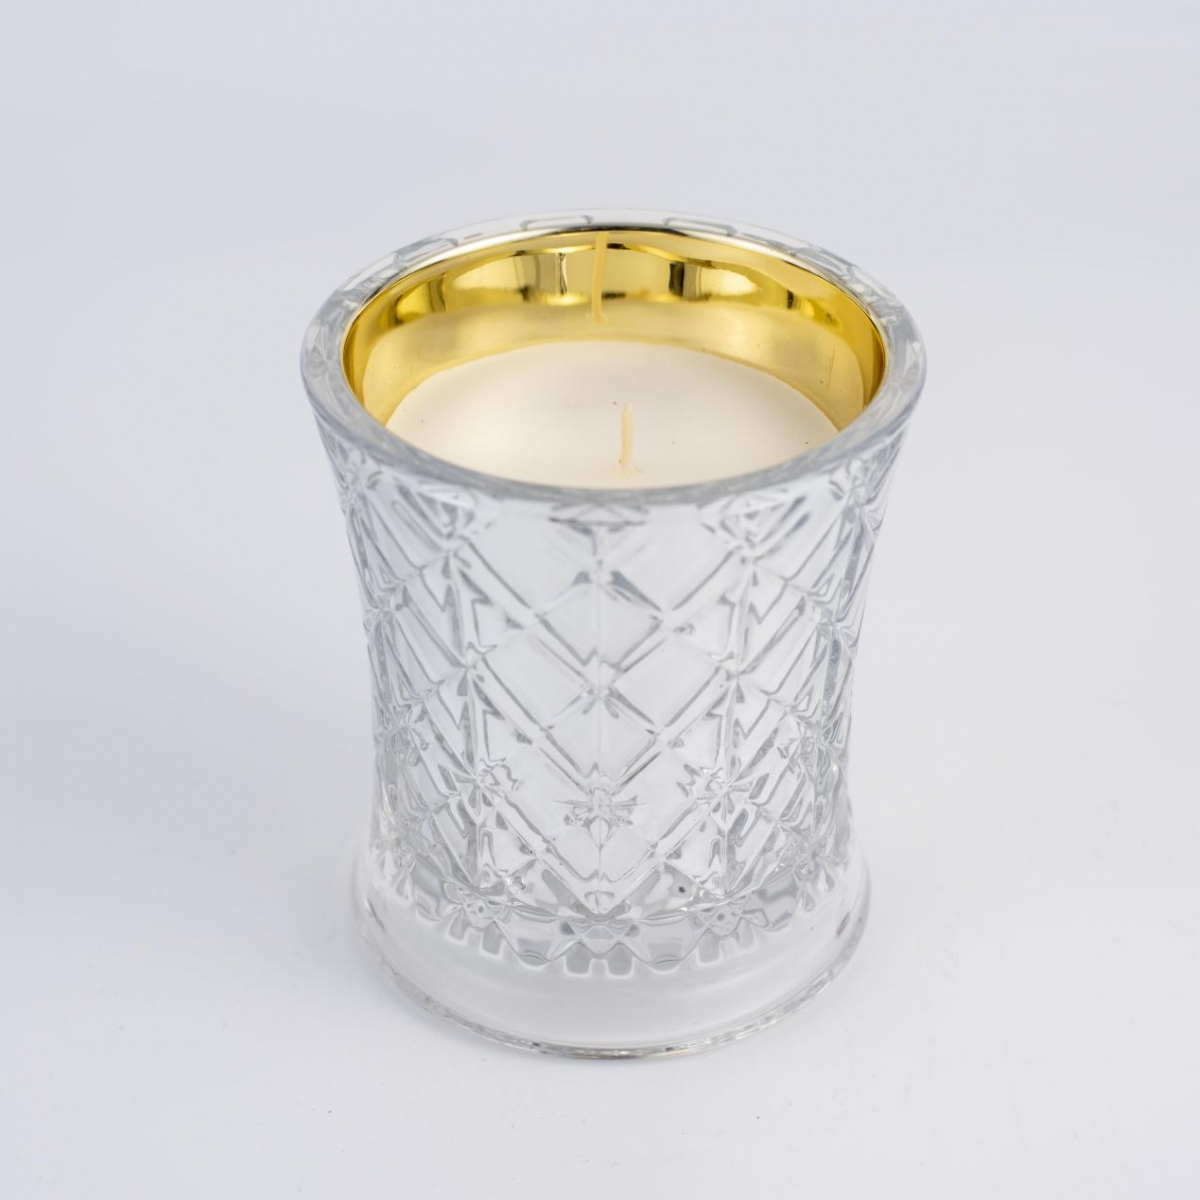 Essential Oils Candles -Soy Wax ,Vegan Candles ,Regular Geometry ,Gold Silver Candle Jar ,China Factory ,Price-HOWCANDLE-Candles,Scented Candles,Aromatherapy Candles,Soy Candles,Vegan Candles,Jar Candles,Pillar Candles,Candle Gift Sets,Essential Oils,Reed Diffuser,Candle Holder,